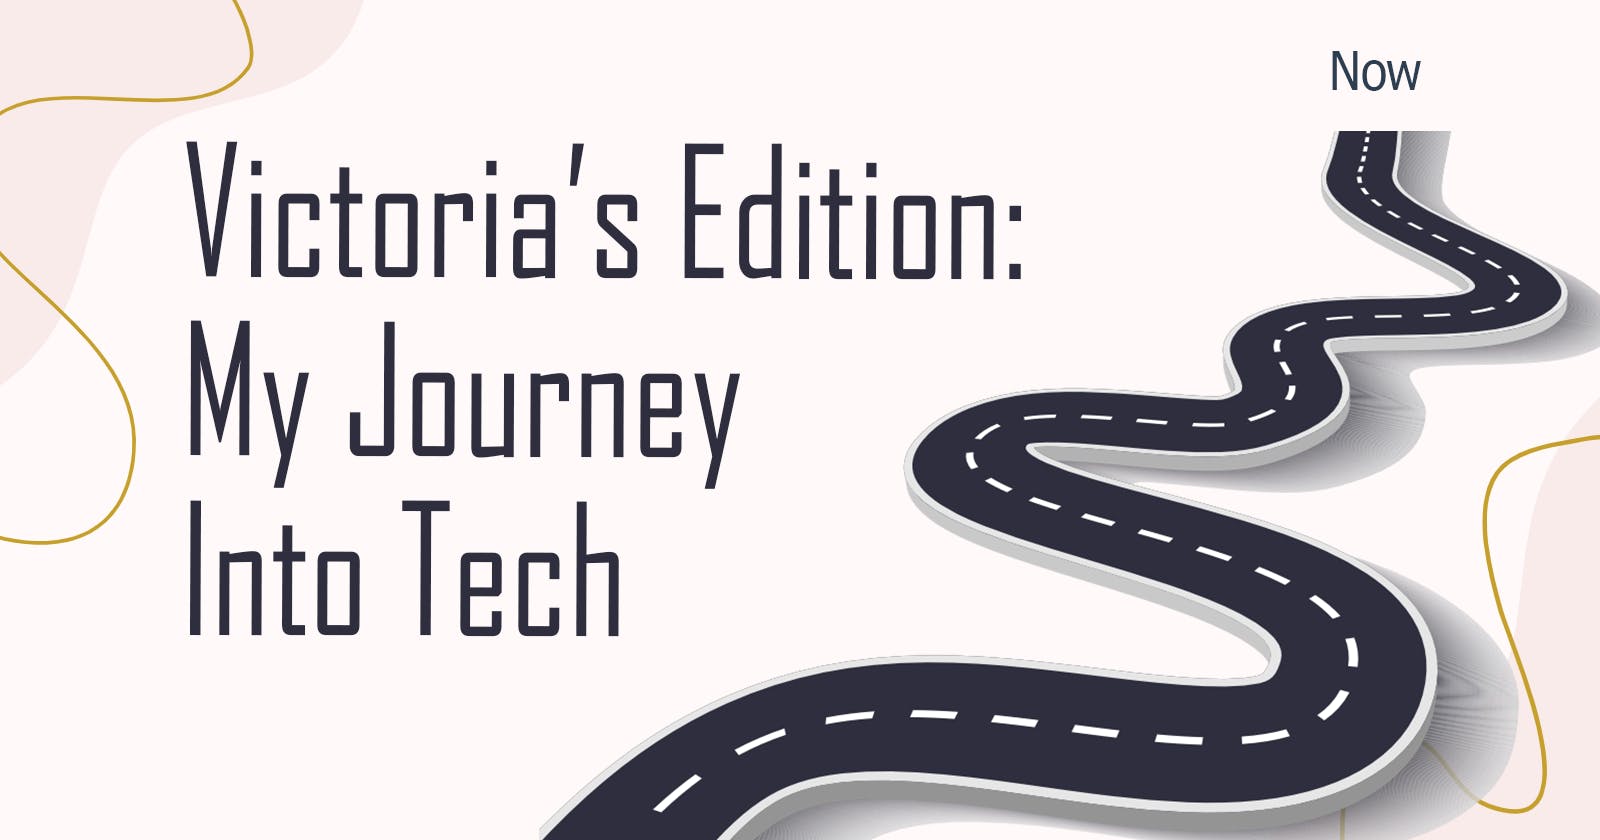 Victoria’s Edition: My Journey Into Tech